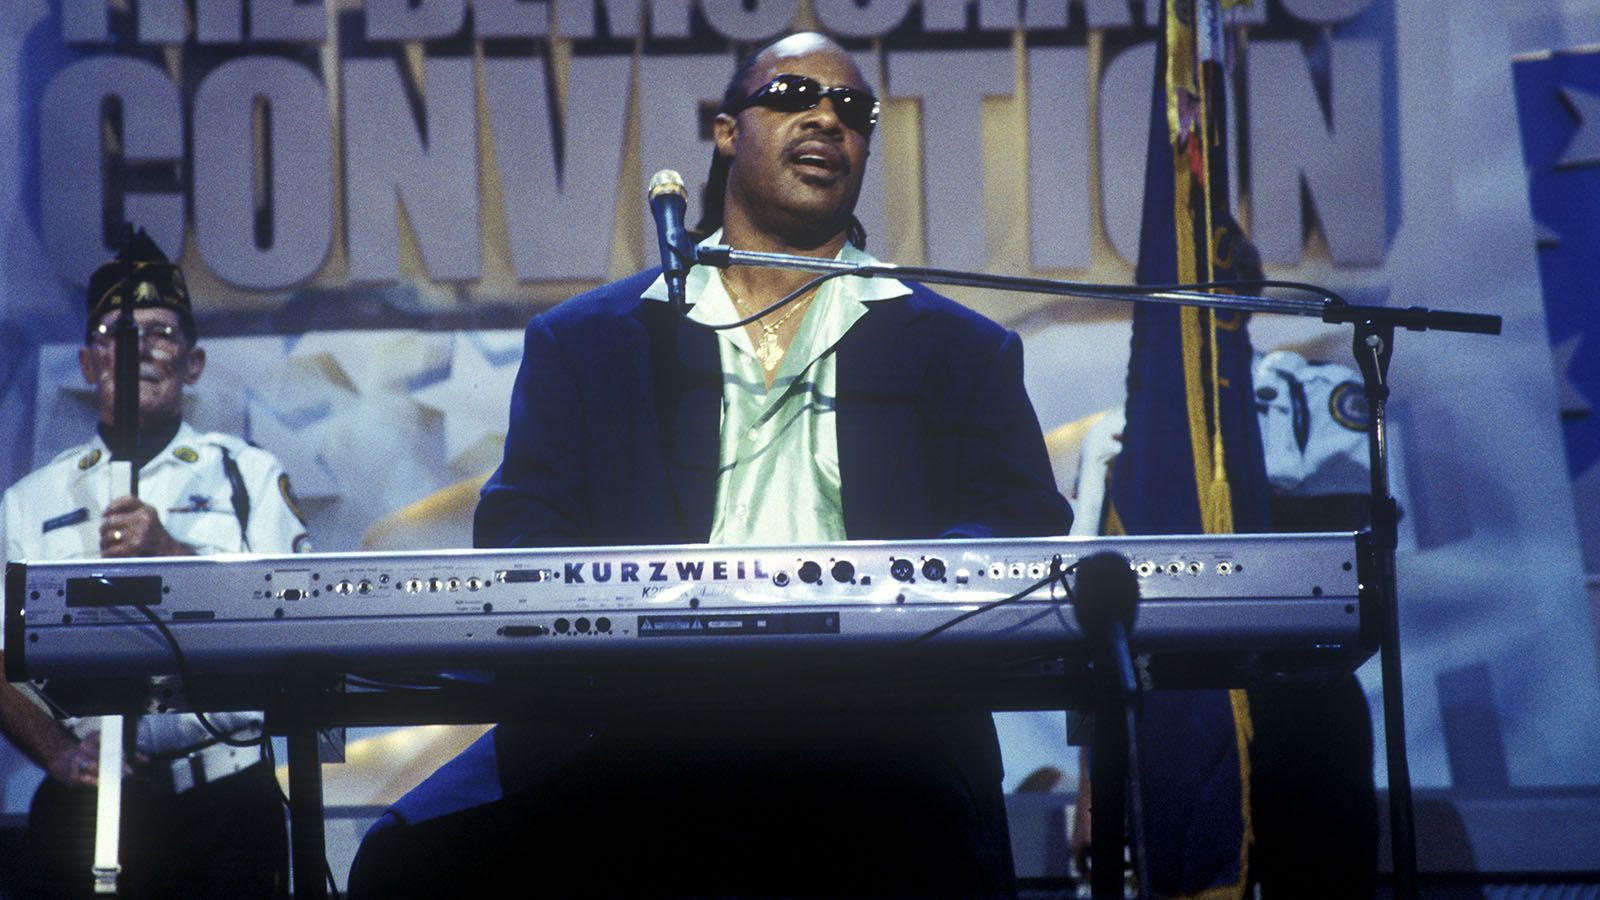 Indiana Musical Theatre Foundation’s third annual Black History Month Concert Series will feature The Songs of Stevie Wonder at RKF Studios, Feb. 23-24.